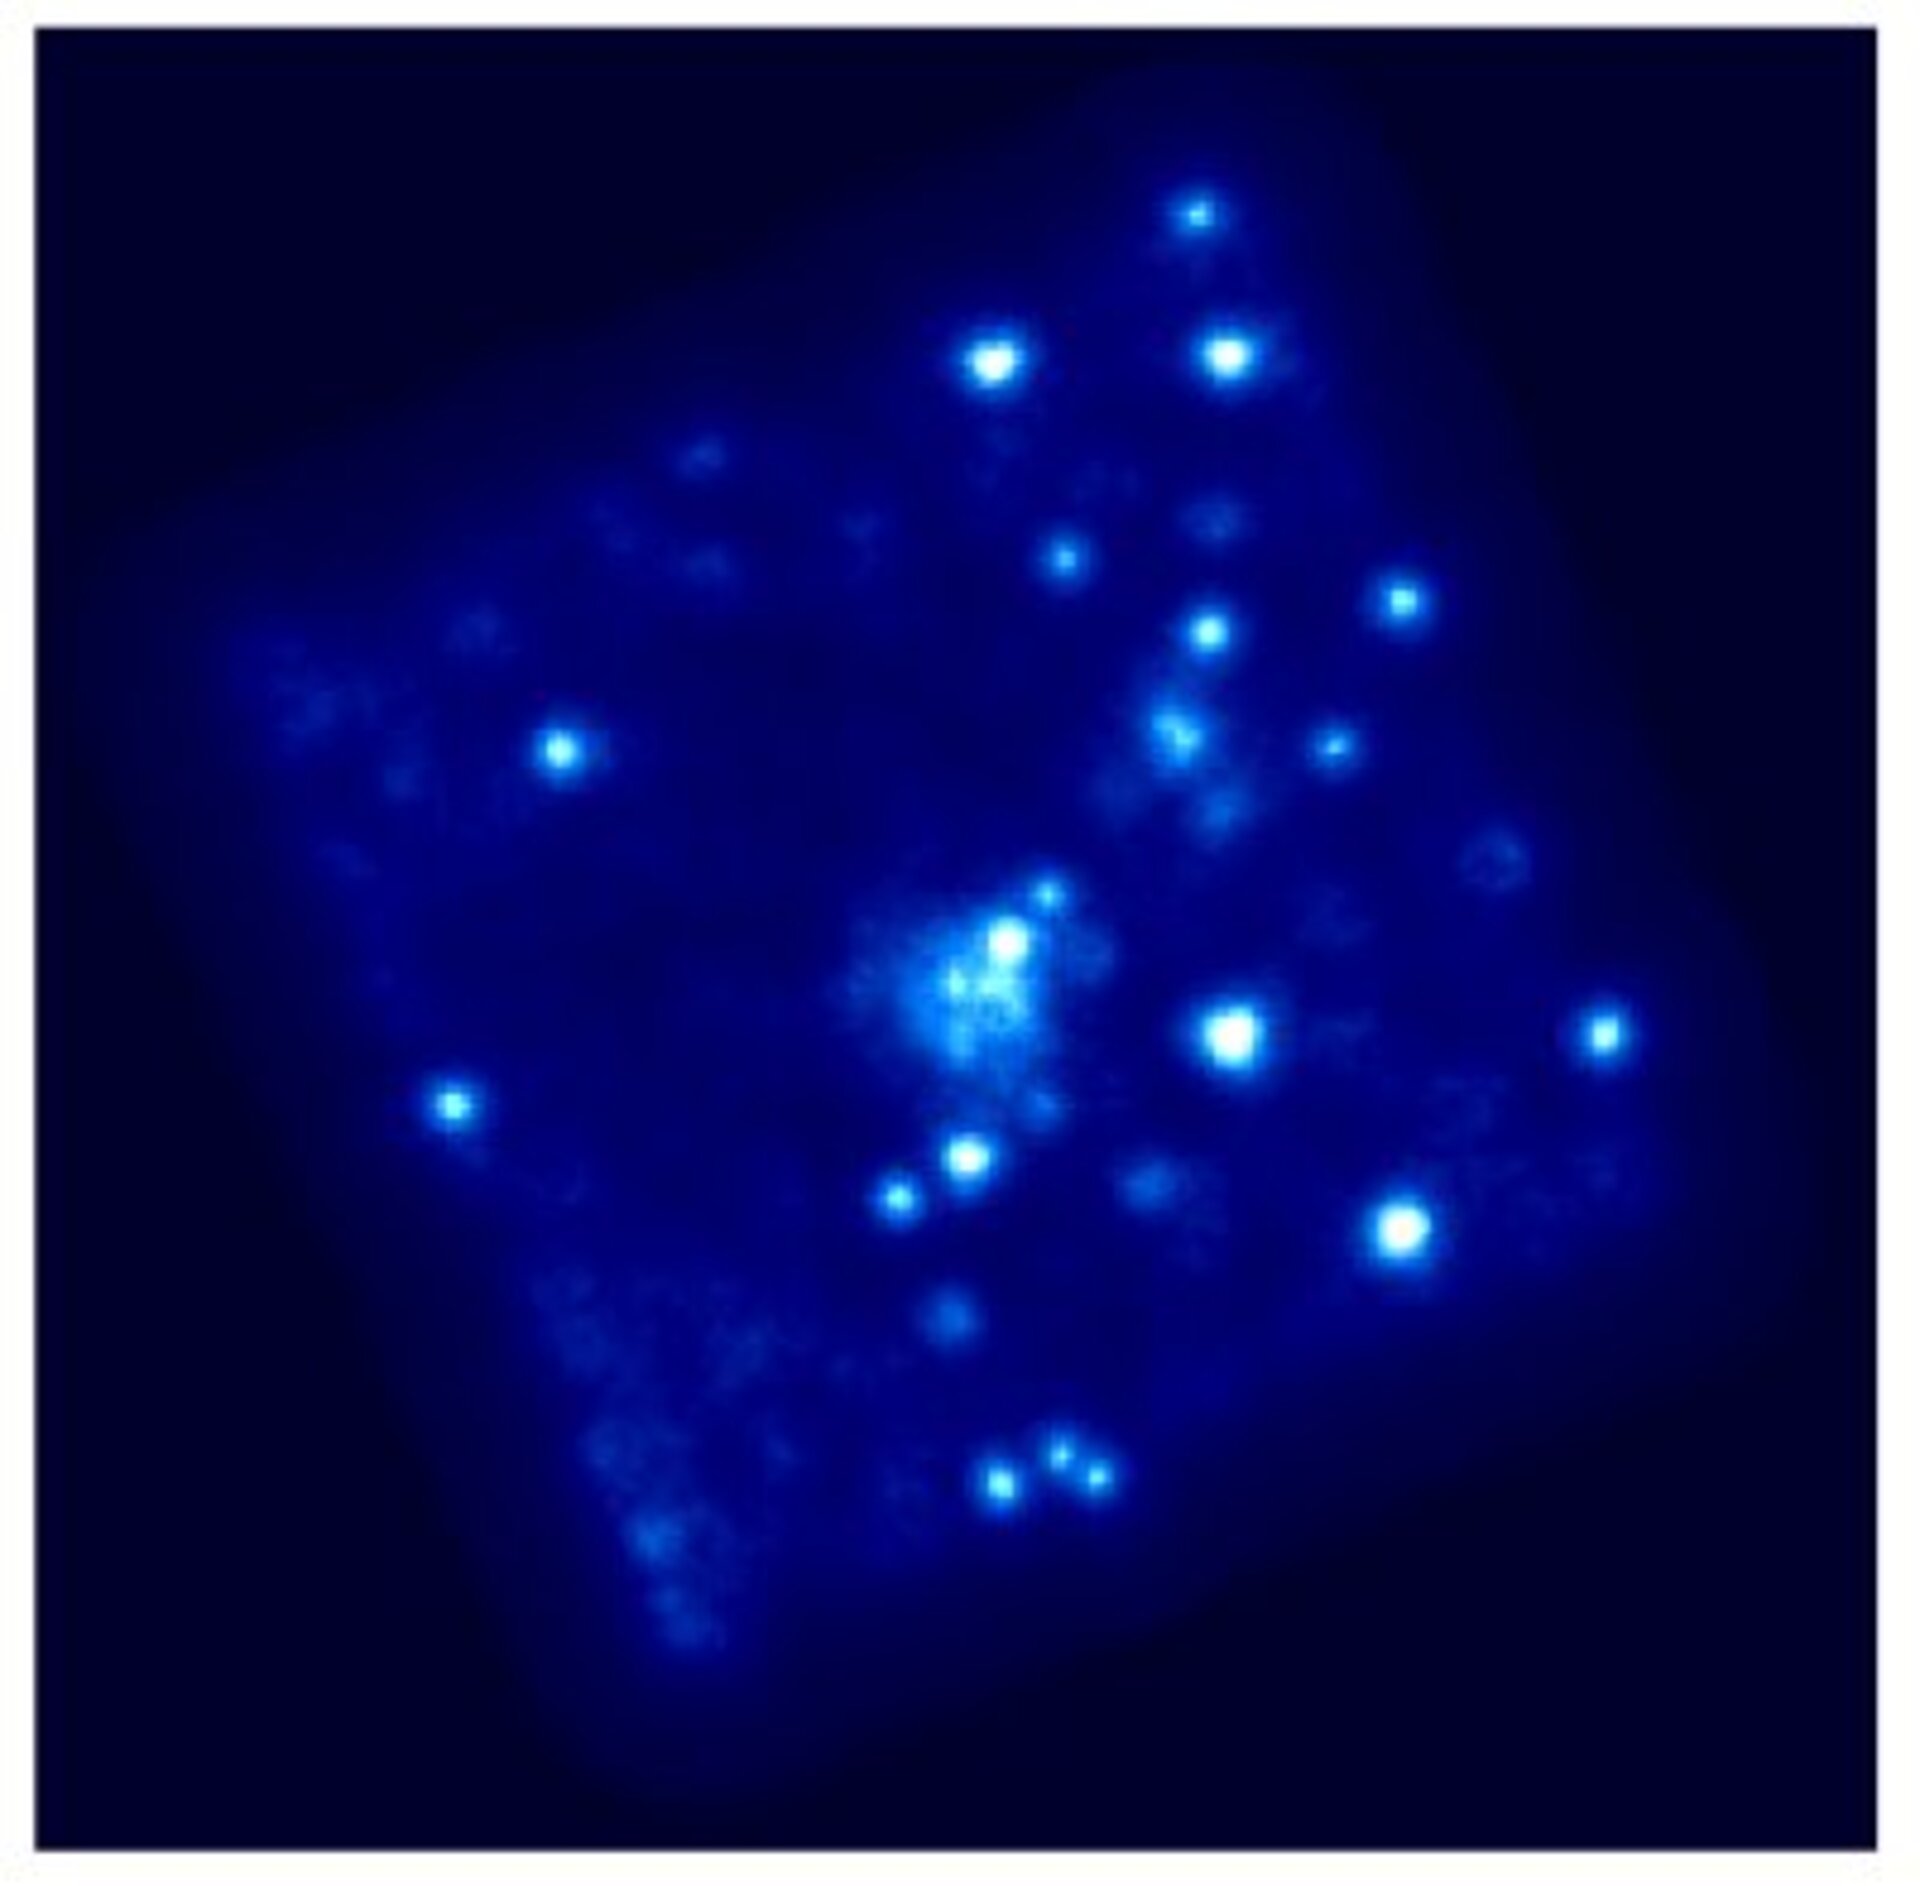 Galaxy cluster observed by XMM-Newton